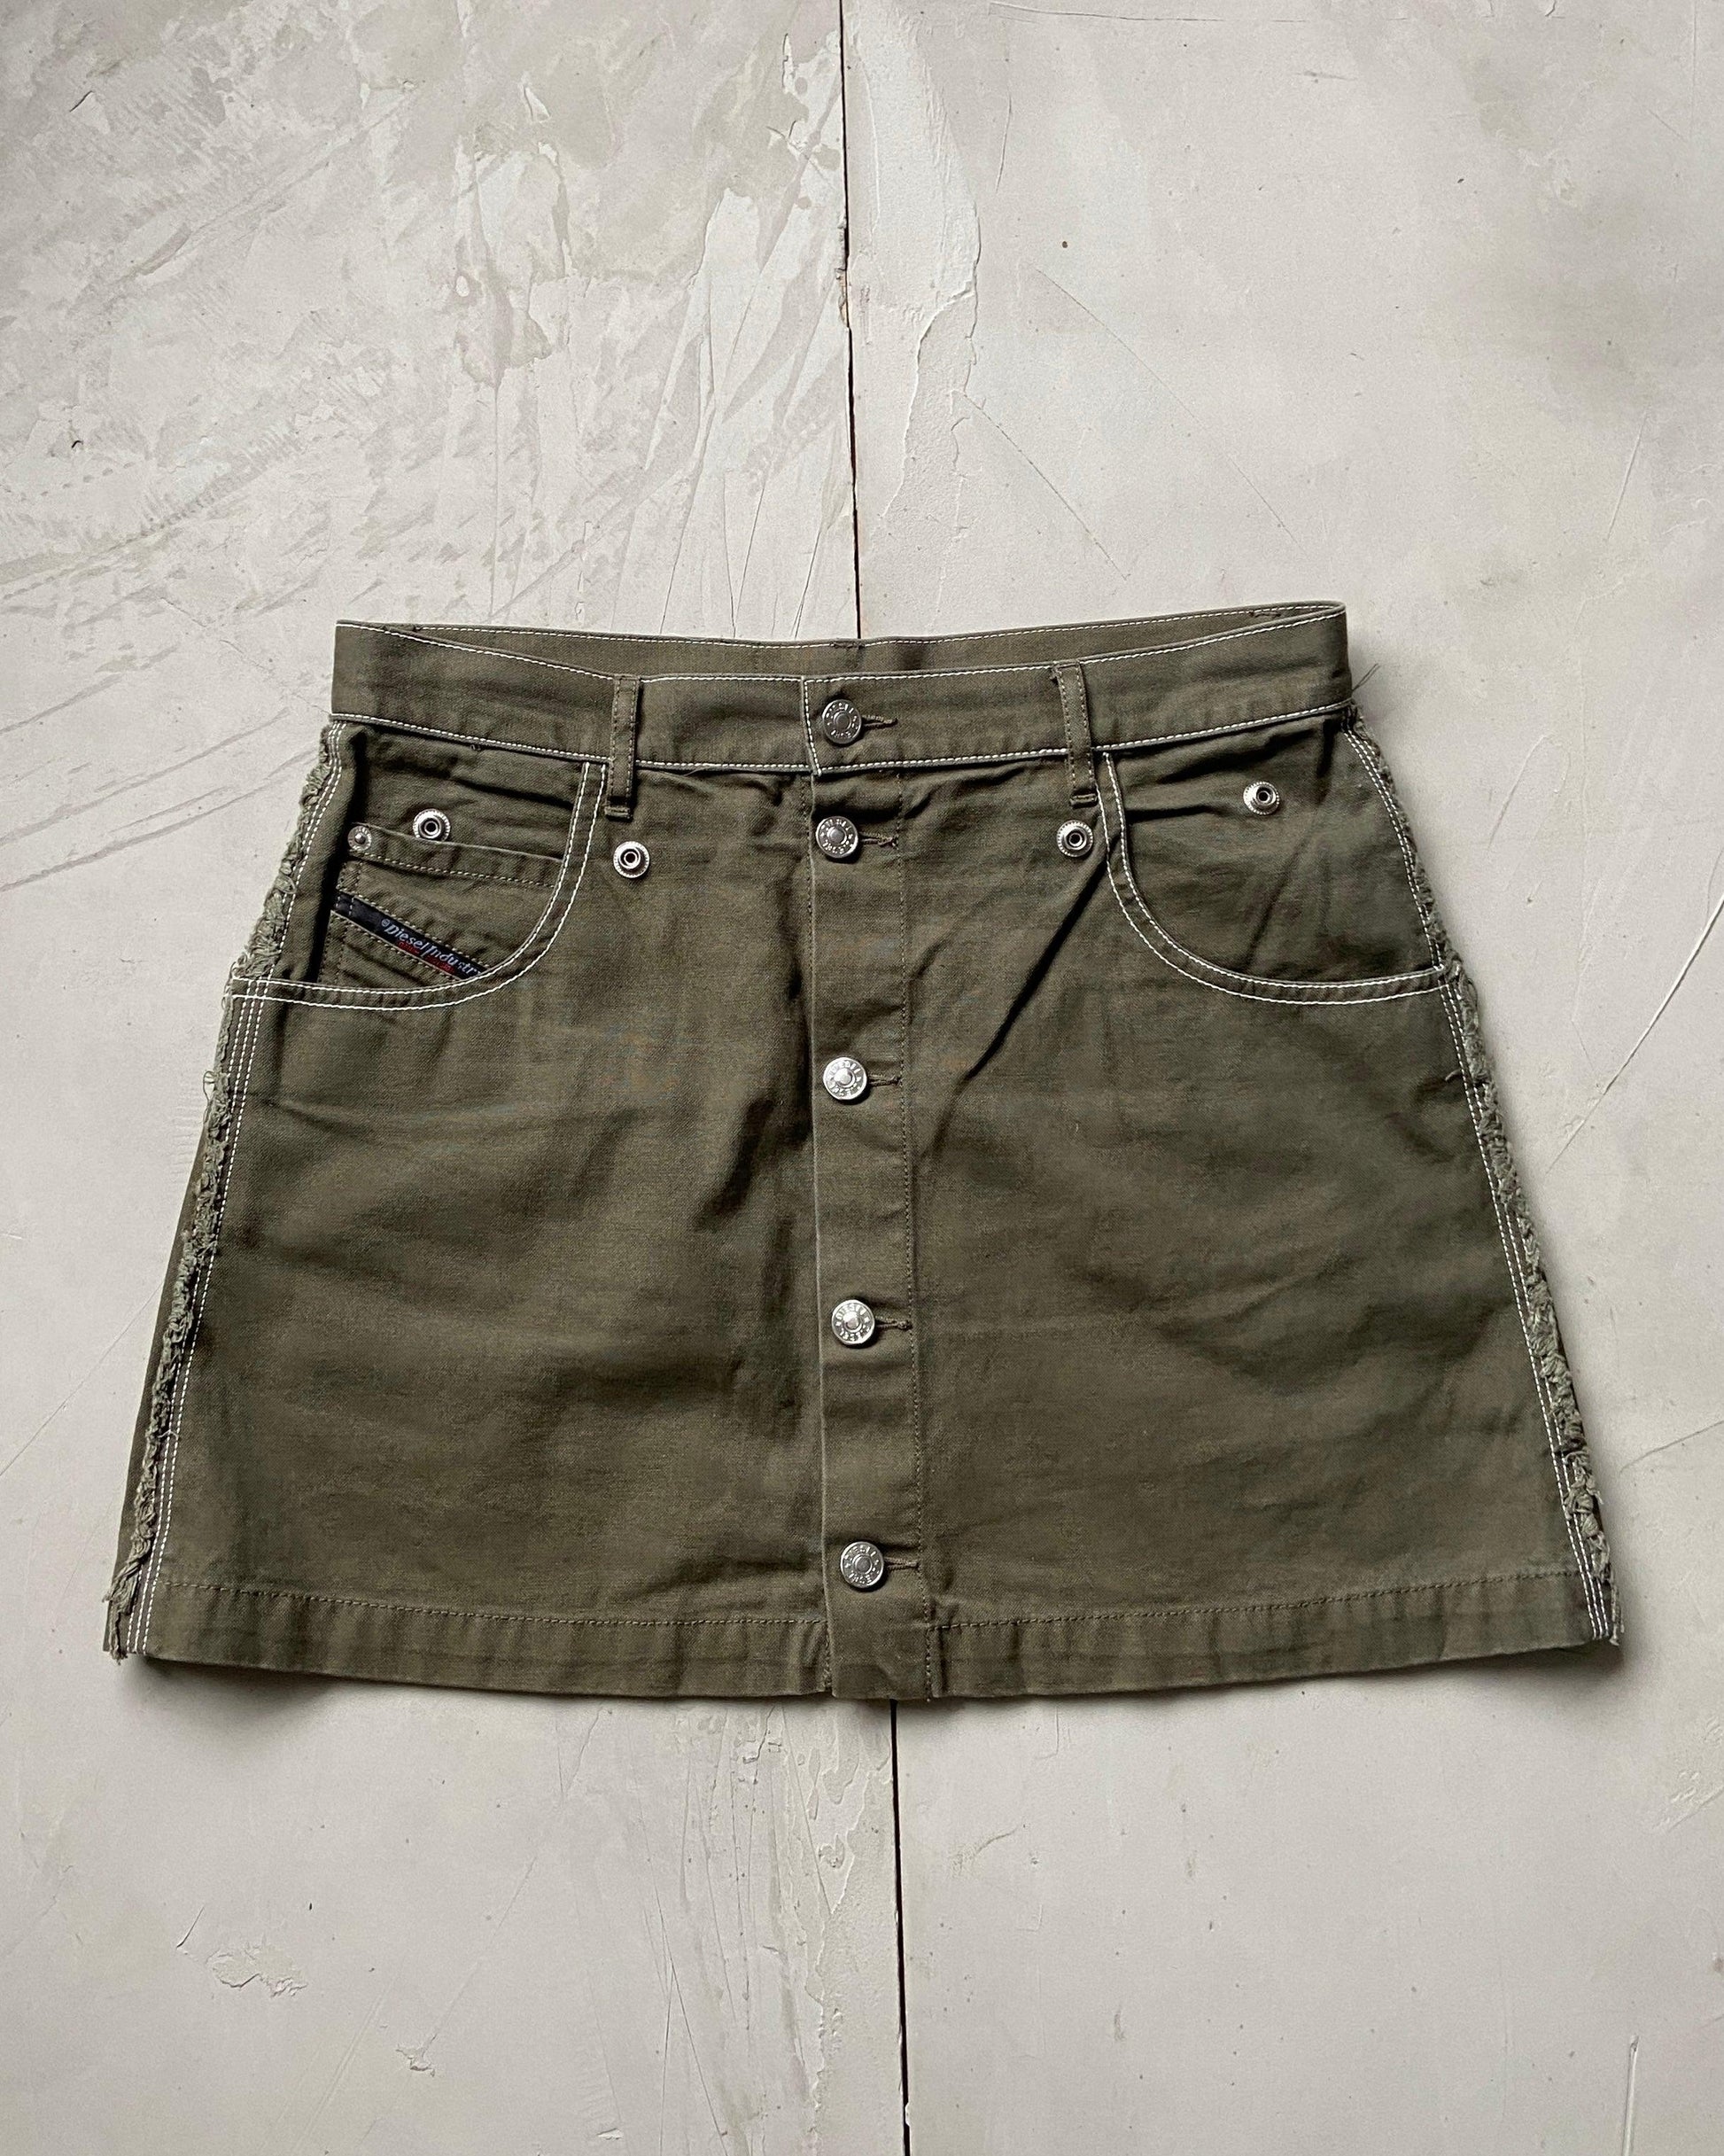 DIESEL REMOVABLE CARGO MINI SKIRT - W28" - Known Source